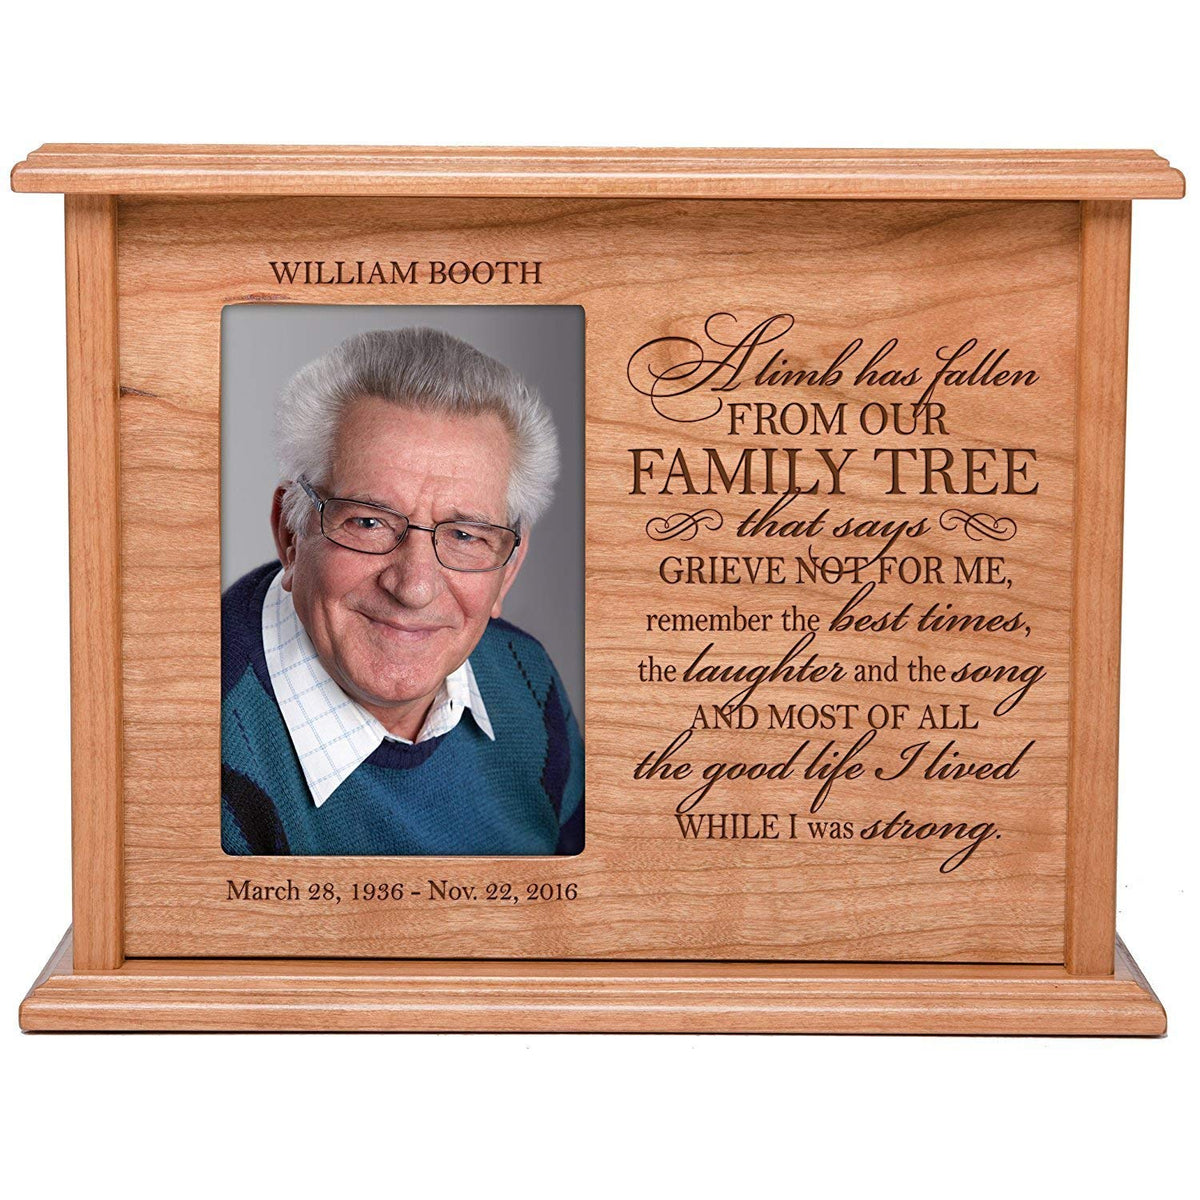 Custom Memorial Cremation Urn Box with 4x6 Photo holds 200 cu in of Human Ashes| A Limb Has Fallen - LifeSong Milestones